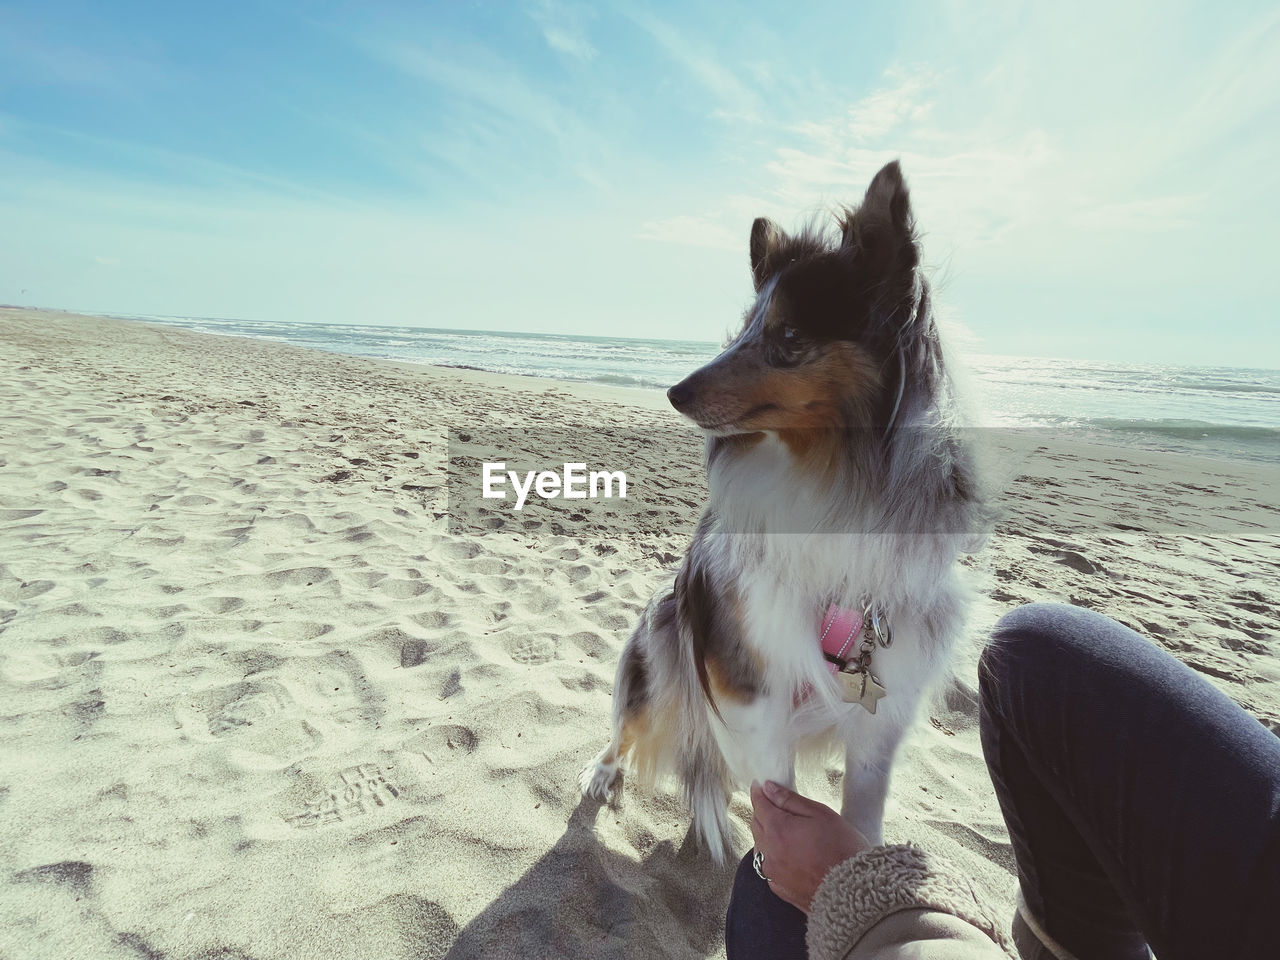 pet, one animal, animal, domestic animals, mammal, animal themes, beach, land, dog, canine, sea, sky, sand, water, nature, horizon over water, horizon, day, sunlight, sitting, relaxation, looking, beauty in nature, outdoors, scenics - nature, leisure activity, one person, looking away